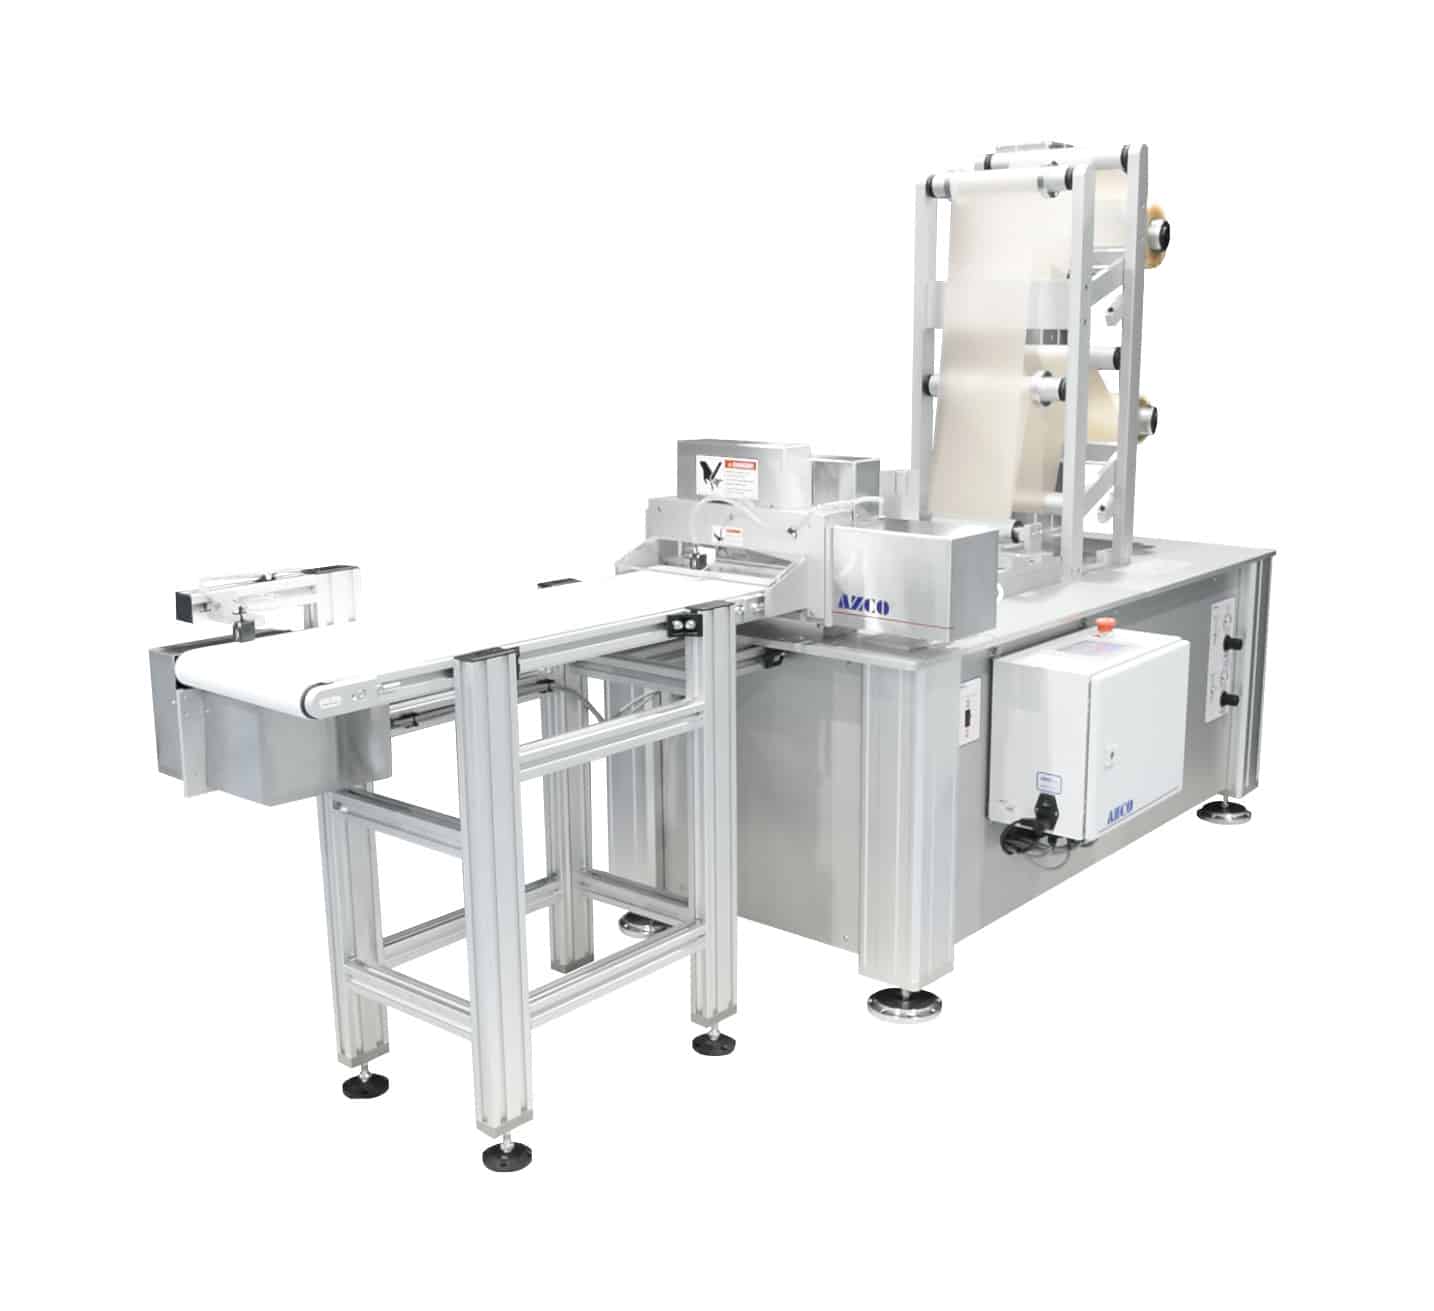 Complete system unwinds, feeds, punches, and cuts PVC film